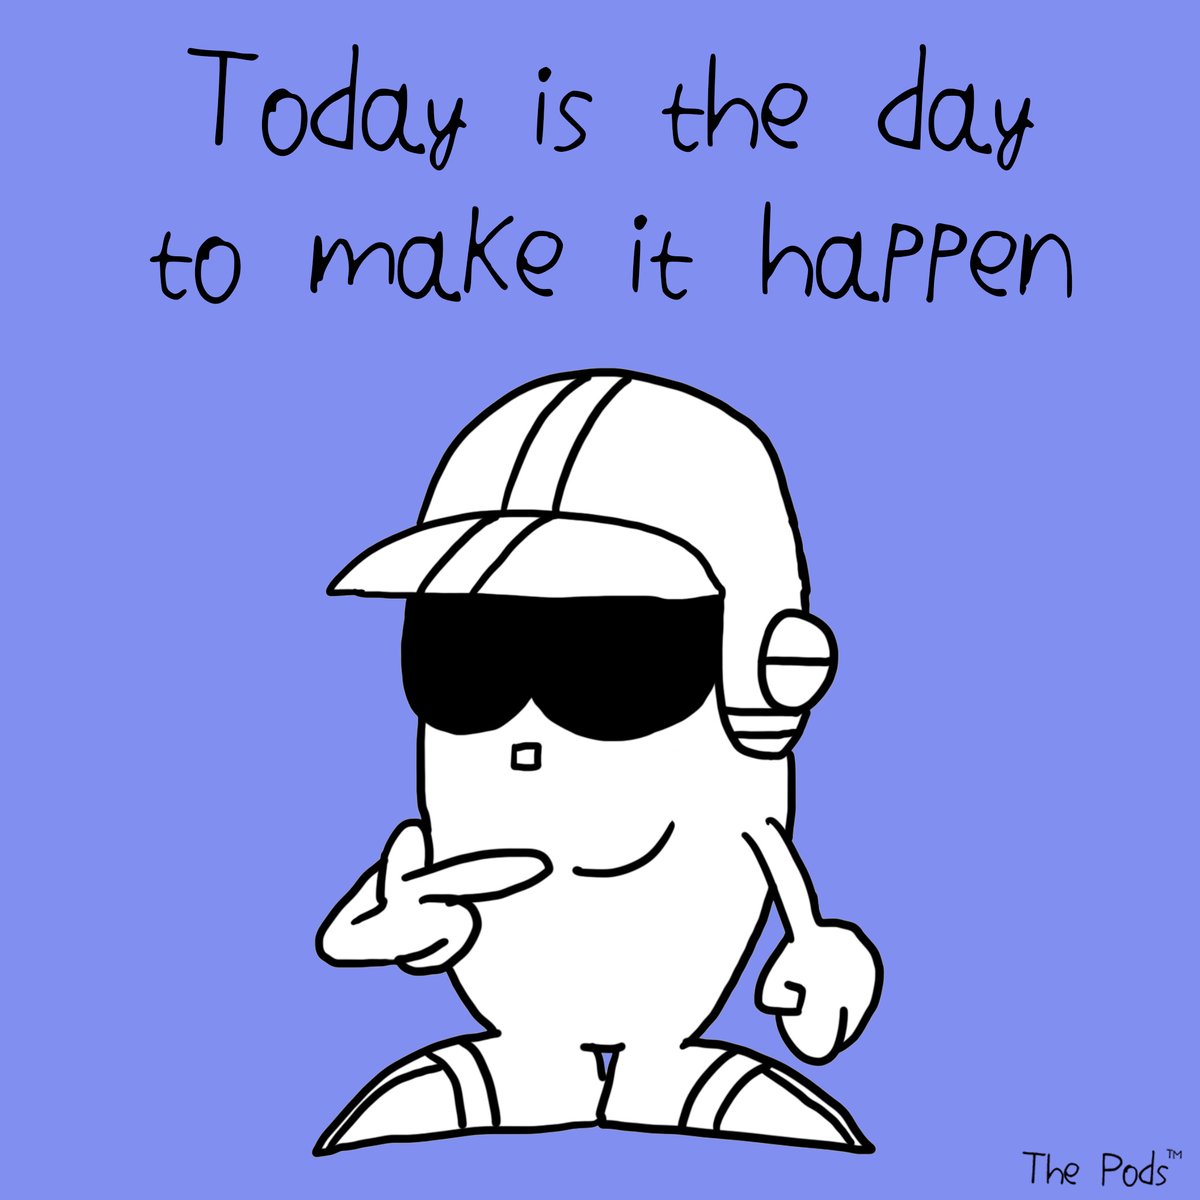 Happy Monday!
#youcandoit #makeithappen #positive #positivity #positivevibes #beawesome #happyday #happydays
#awesome #meetthepods #thepods #spypod #wakeup #quote #quoteoftheday #quotes #MotivationalQuotes